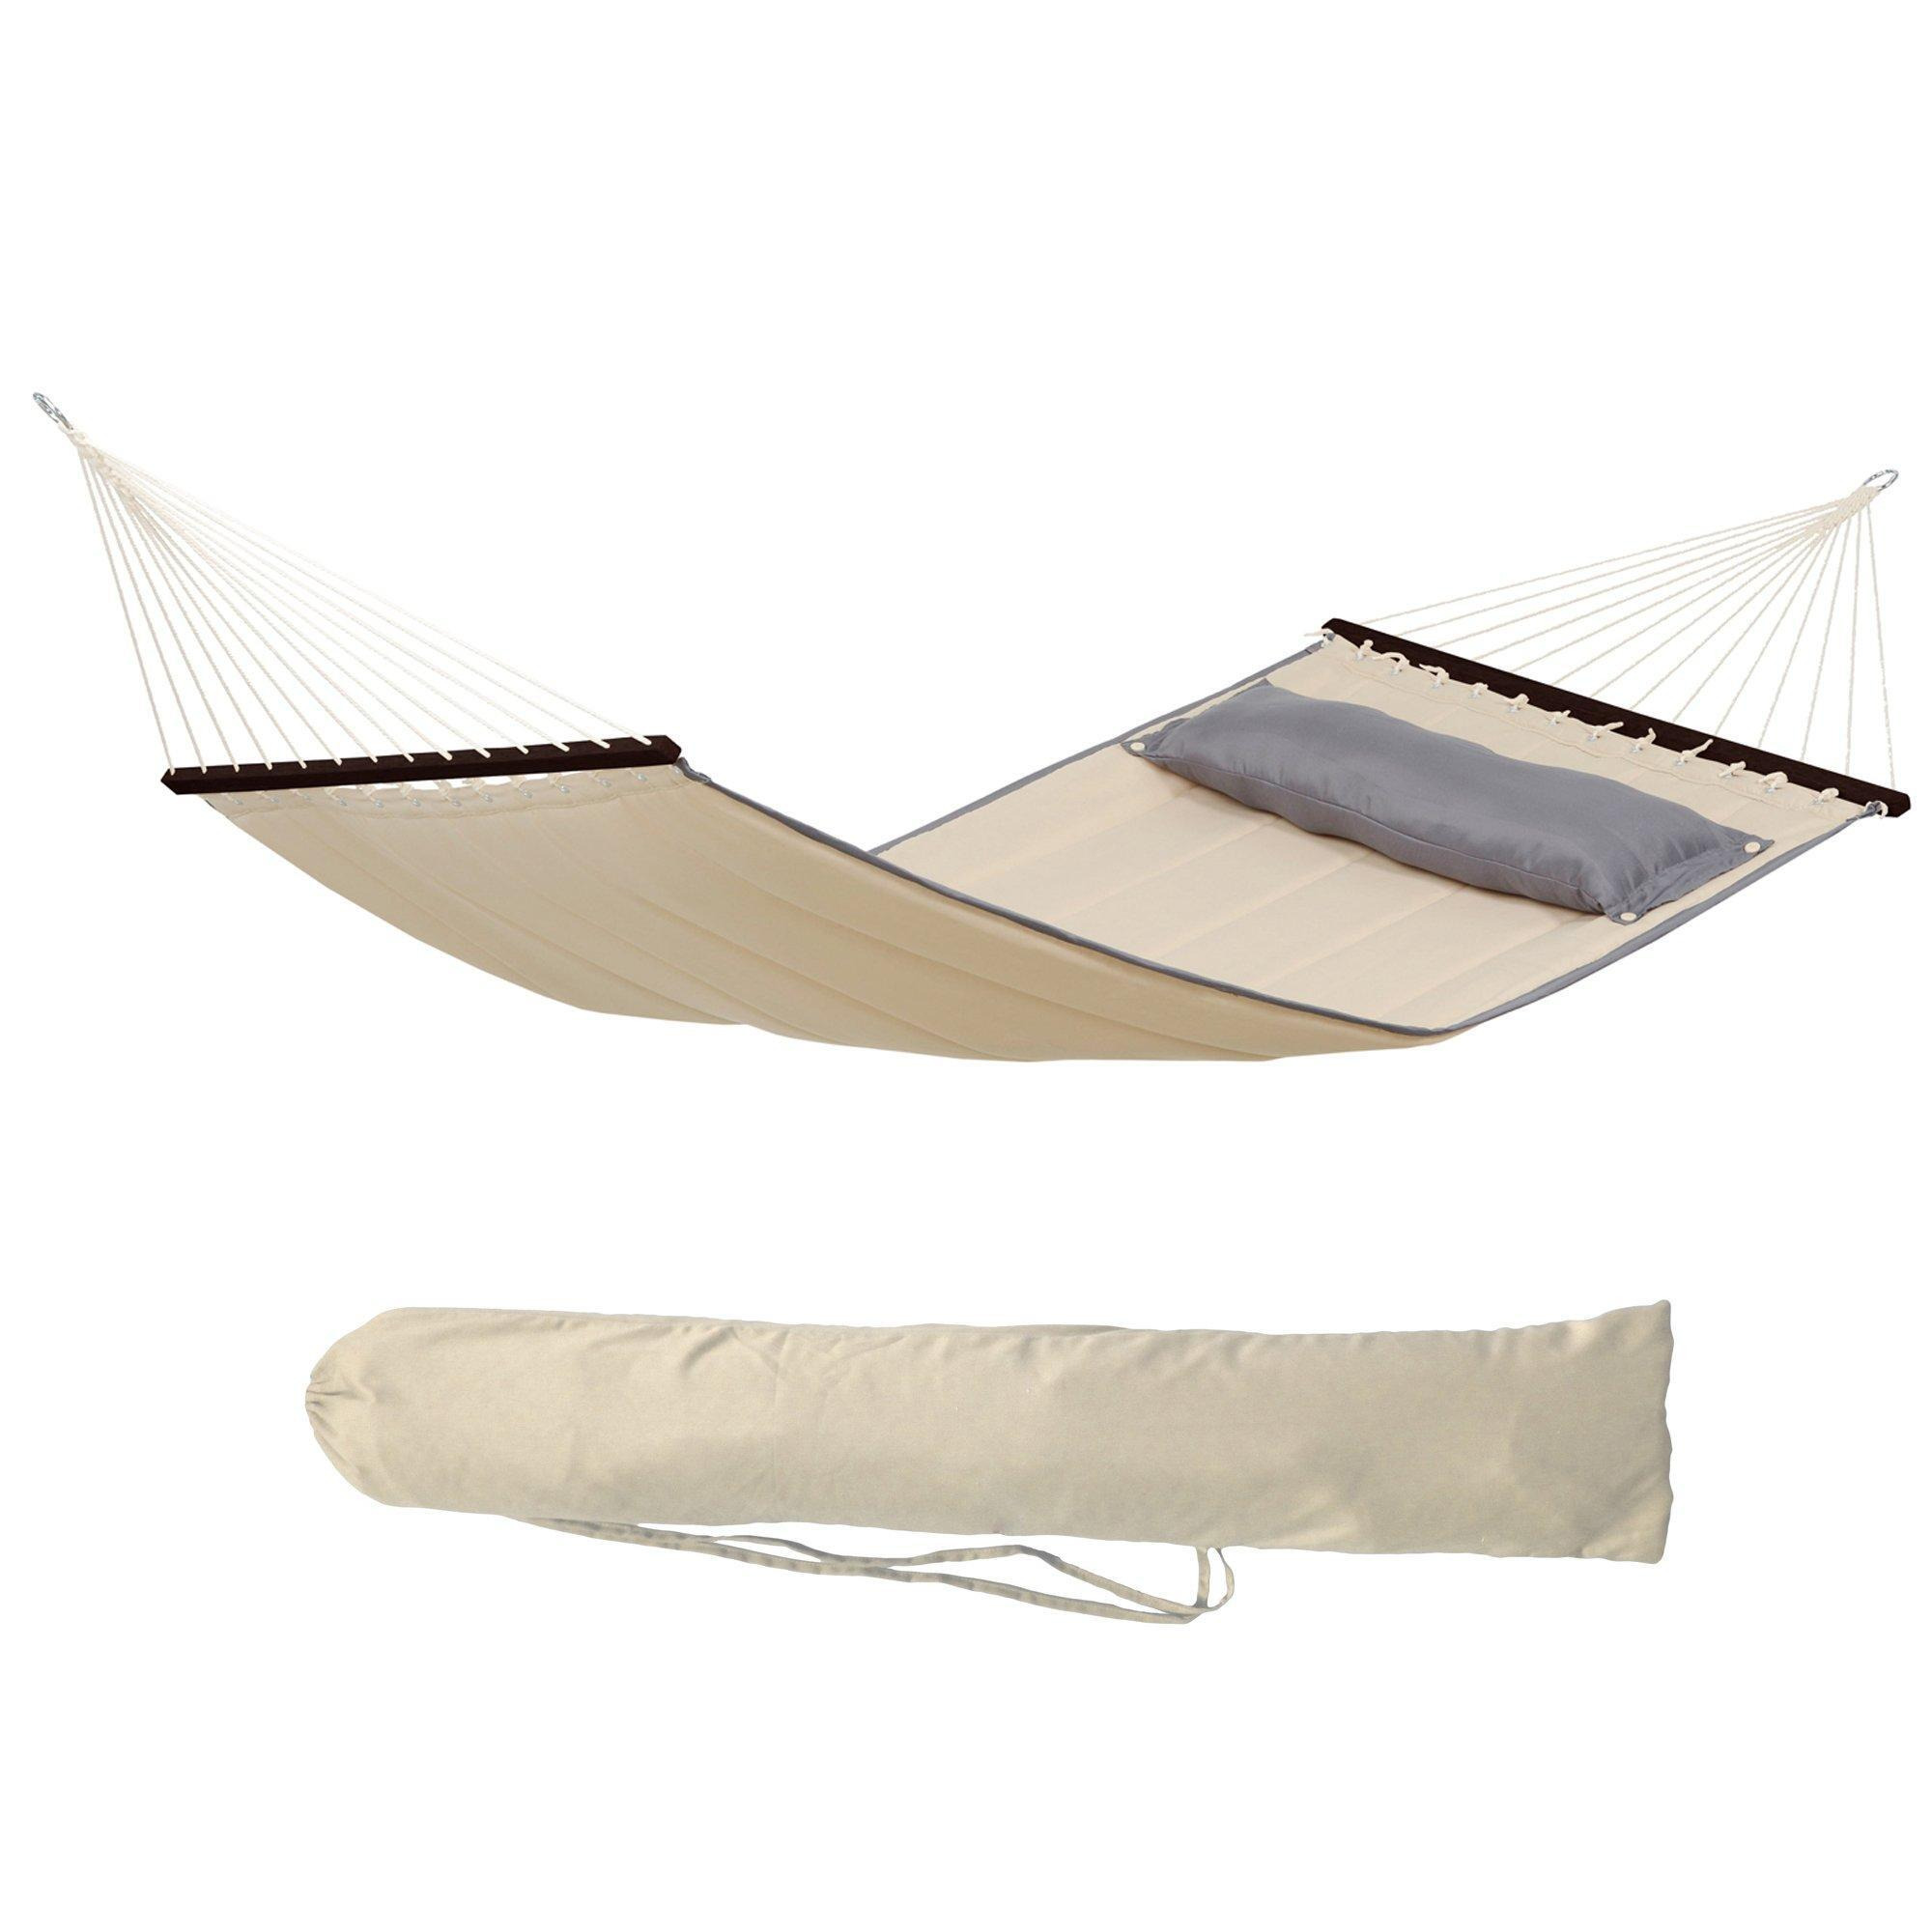 American Dream Double Garden Hammock with Detachable Pillow - Sand - image 1